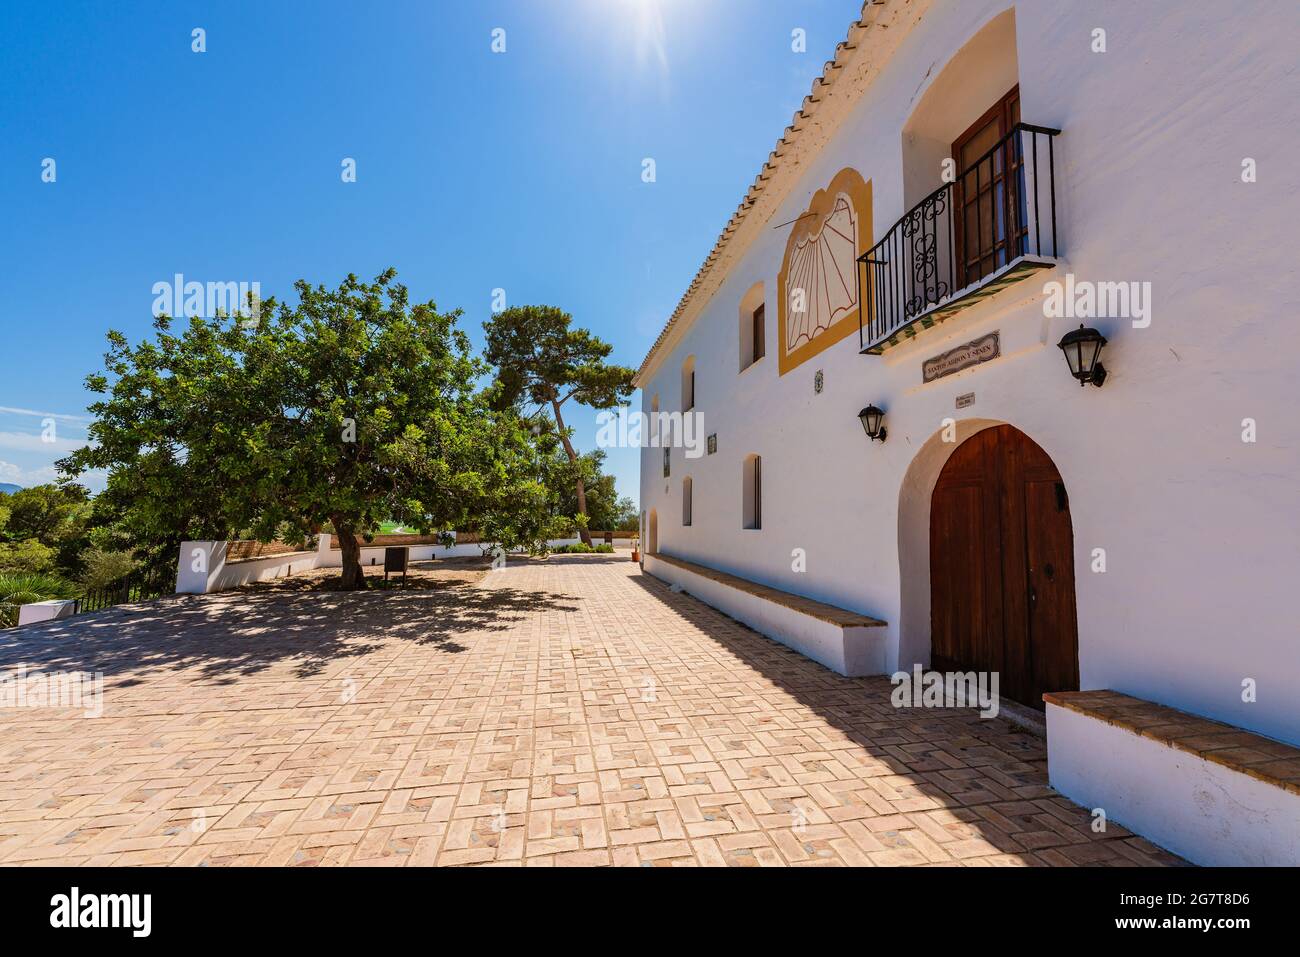 Sueca, Spain. Hermitage of the Saints. White little building on top of a hill. Place of worship. Muntanyeta dels Santa. Stock Photo